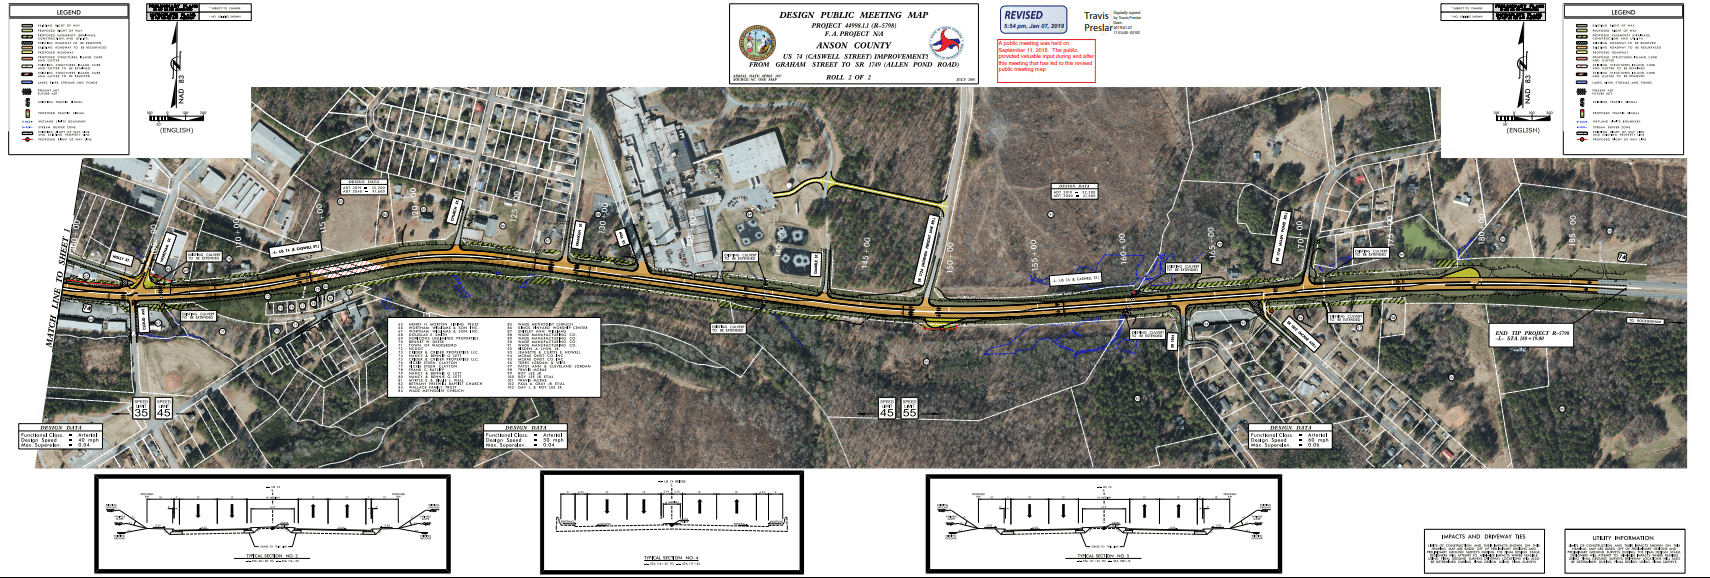 NCDOT Project R-5798 Map 2